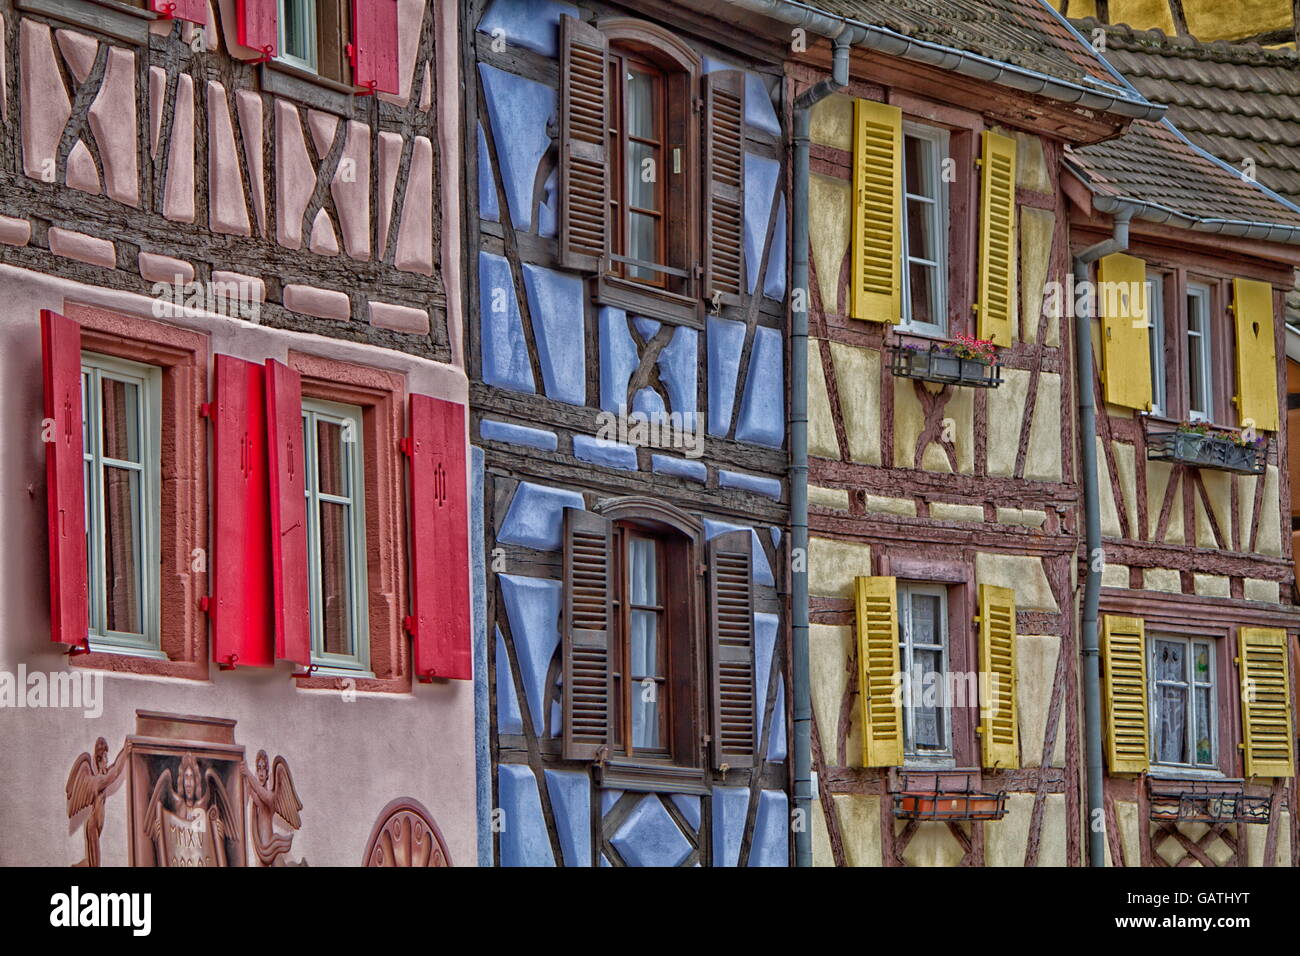 Street with half-timbered medieval houses in Colmar Stock Photo